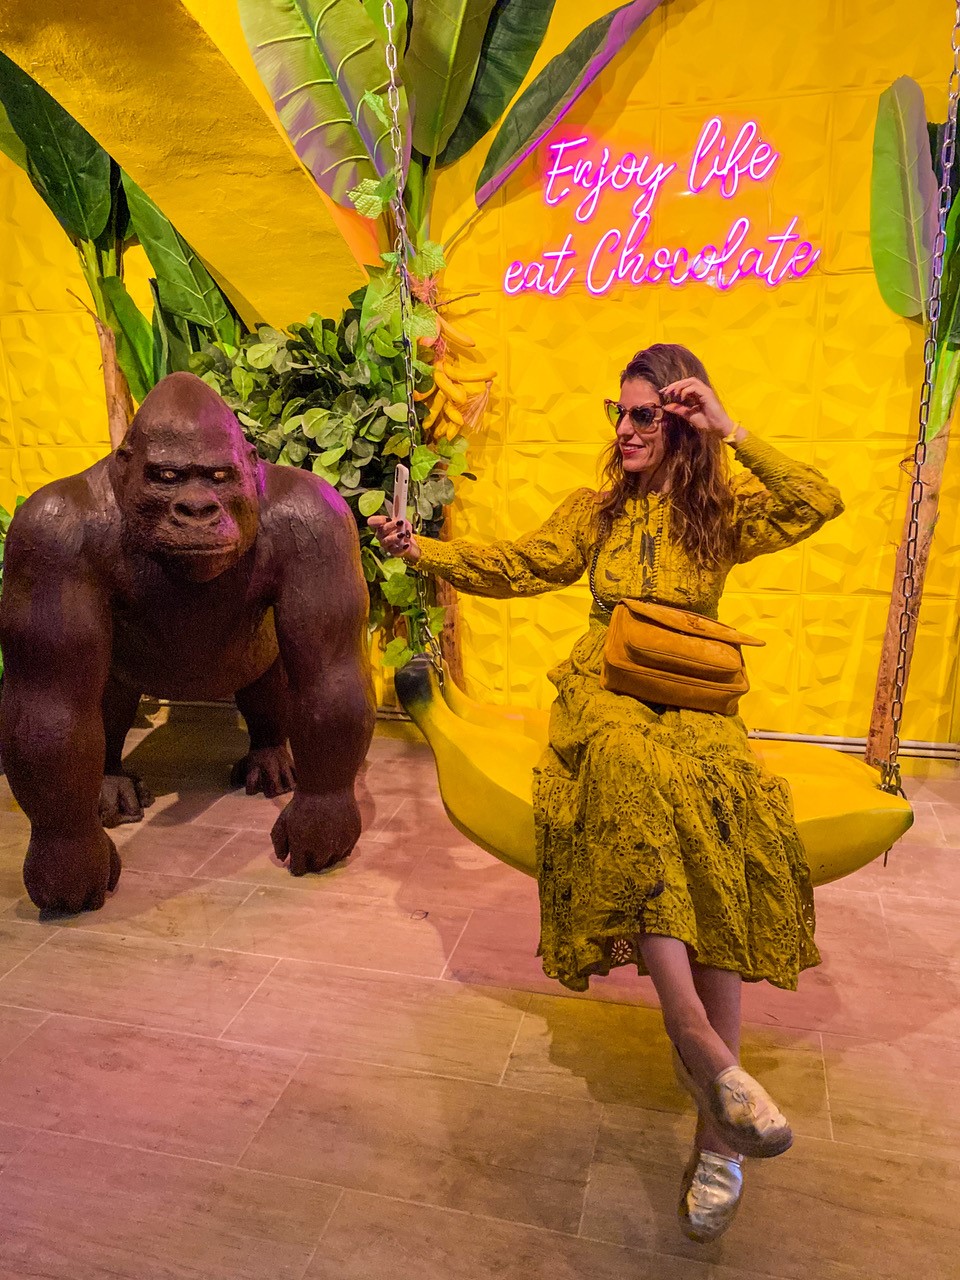 Chocolate Museum Vienna, woman in yellow dress sits on a banana swing. Next to her is a gorilla figure. On the wall is written in illuminated letters 